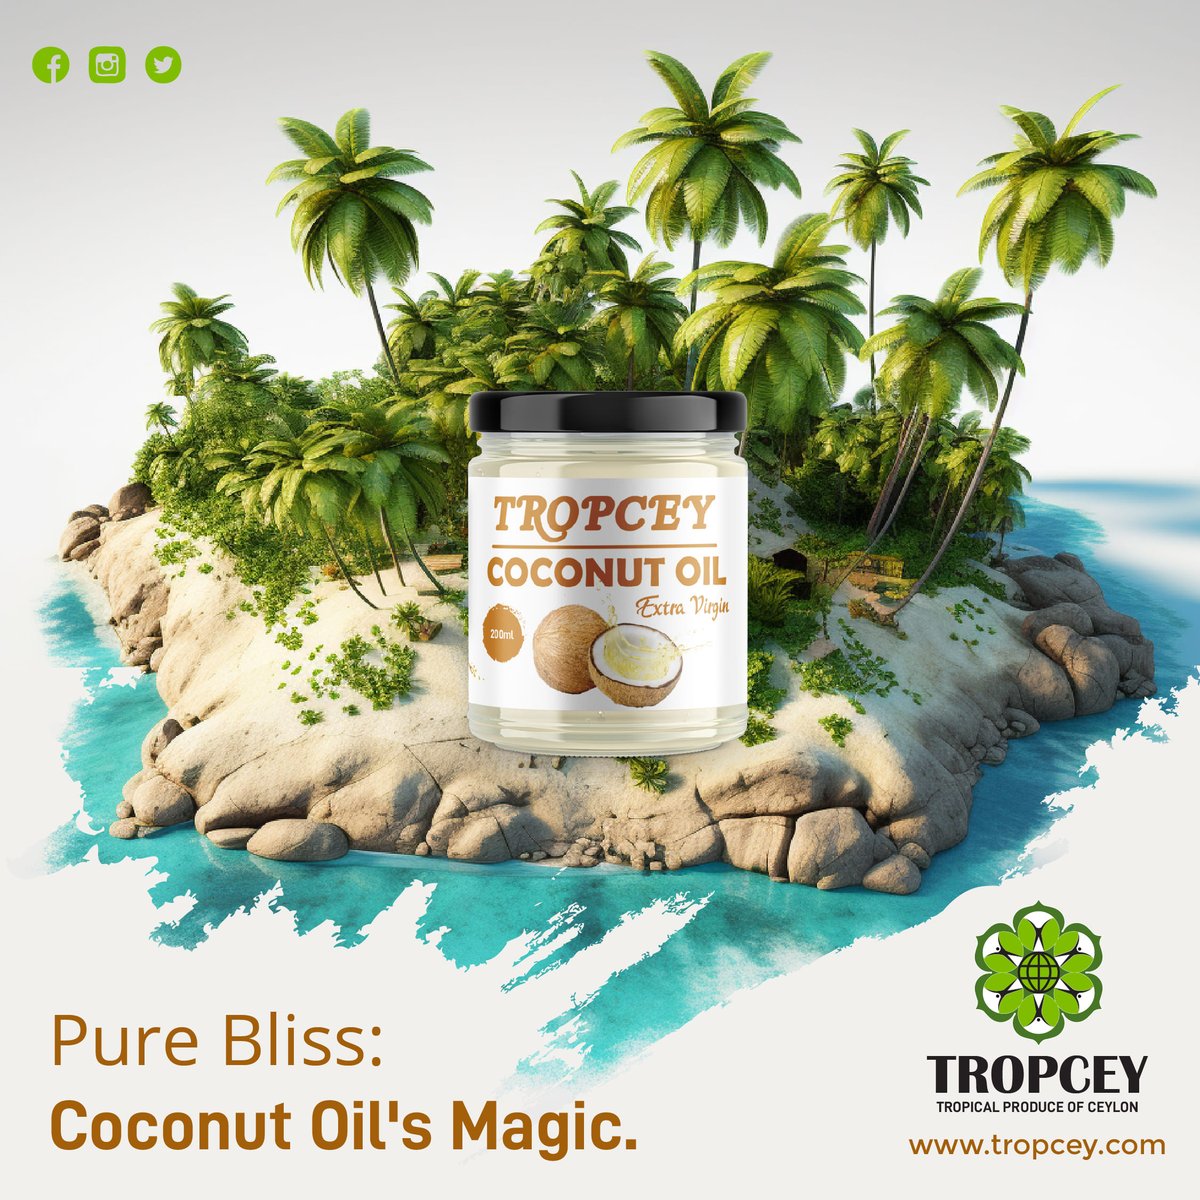 Pure Bliss : Coconut Oil's Magic...🥥
#purebliss #tropceyexport #madeinsrilanka #coconutoil #coconutwater #coconutmilk #coconutchips #coconut #coconutproducts #coconutindustry #tropical